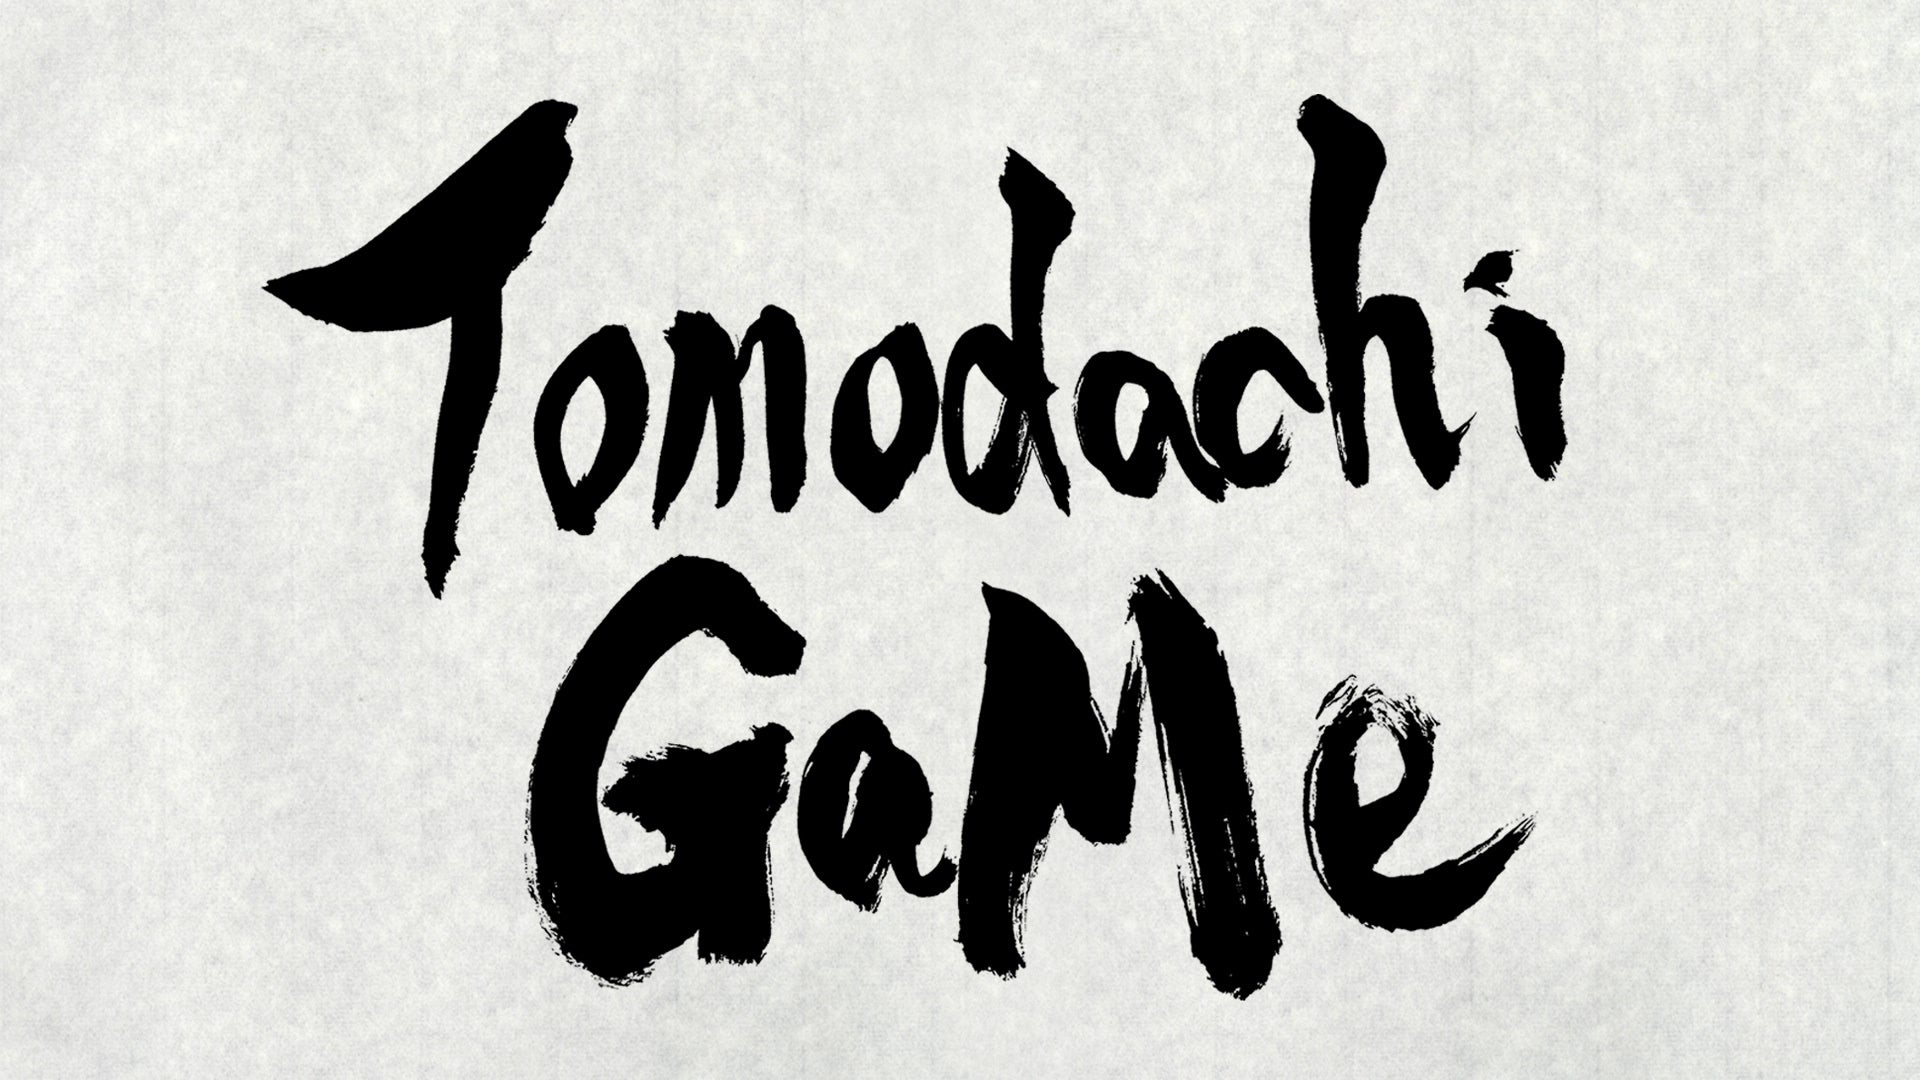 Tomodachi Game You Have a Lot to Say to Me, Don't You? - Watch on  Crunchyroll